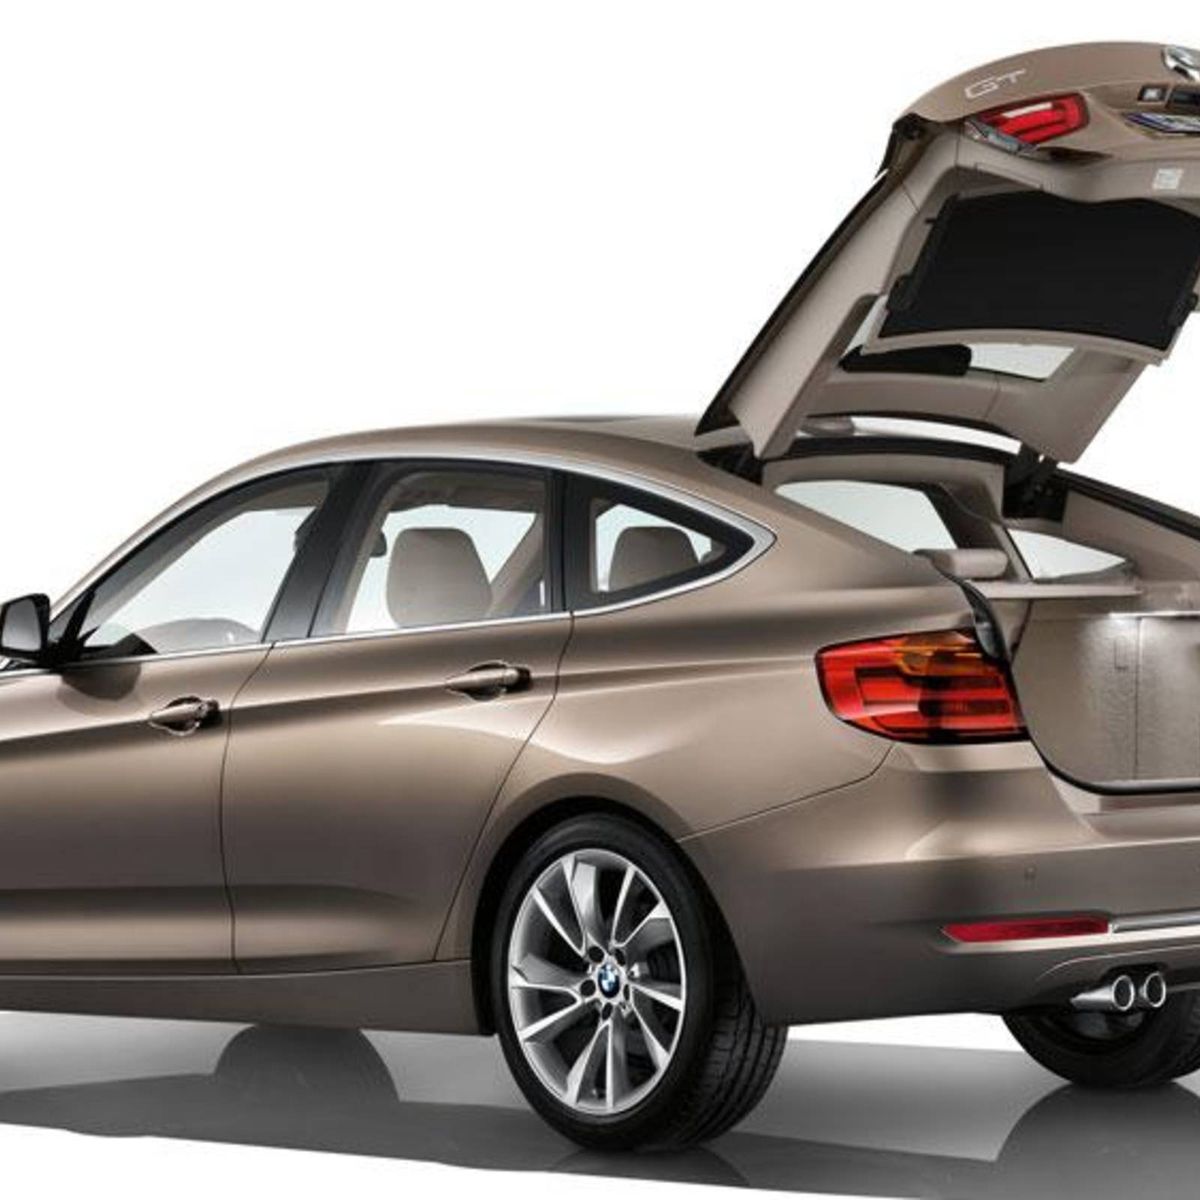 BMW adds 3-series GT to 2014 lineup